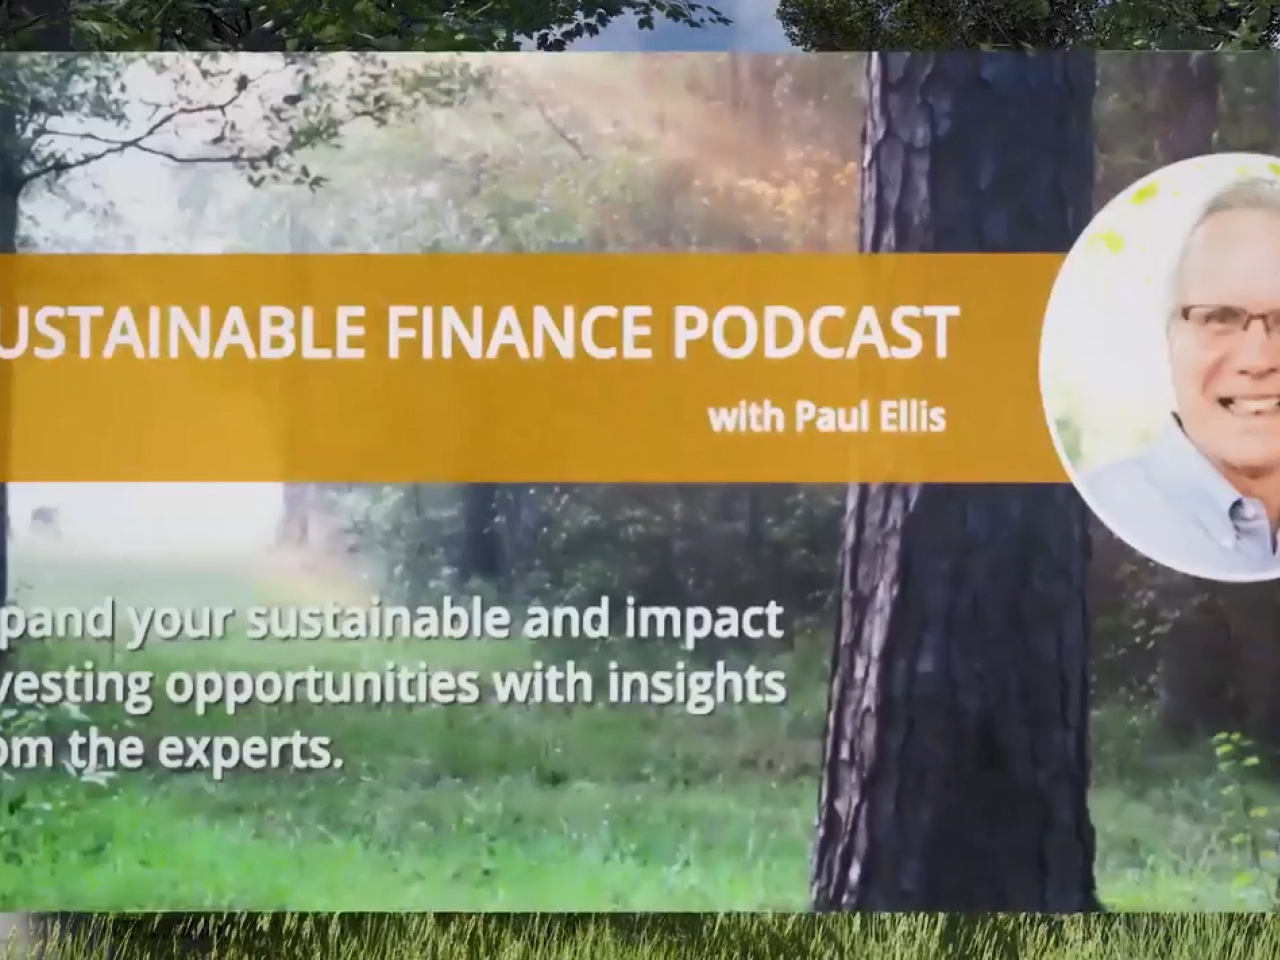 Sustainable finance podcast with Paul Ellis